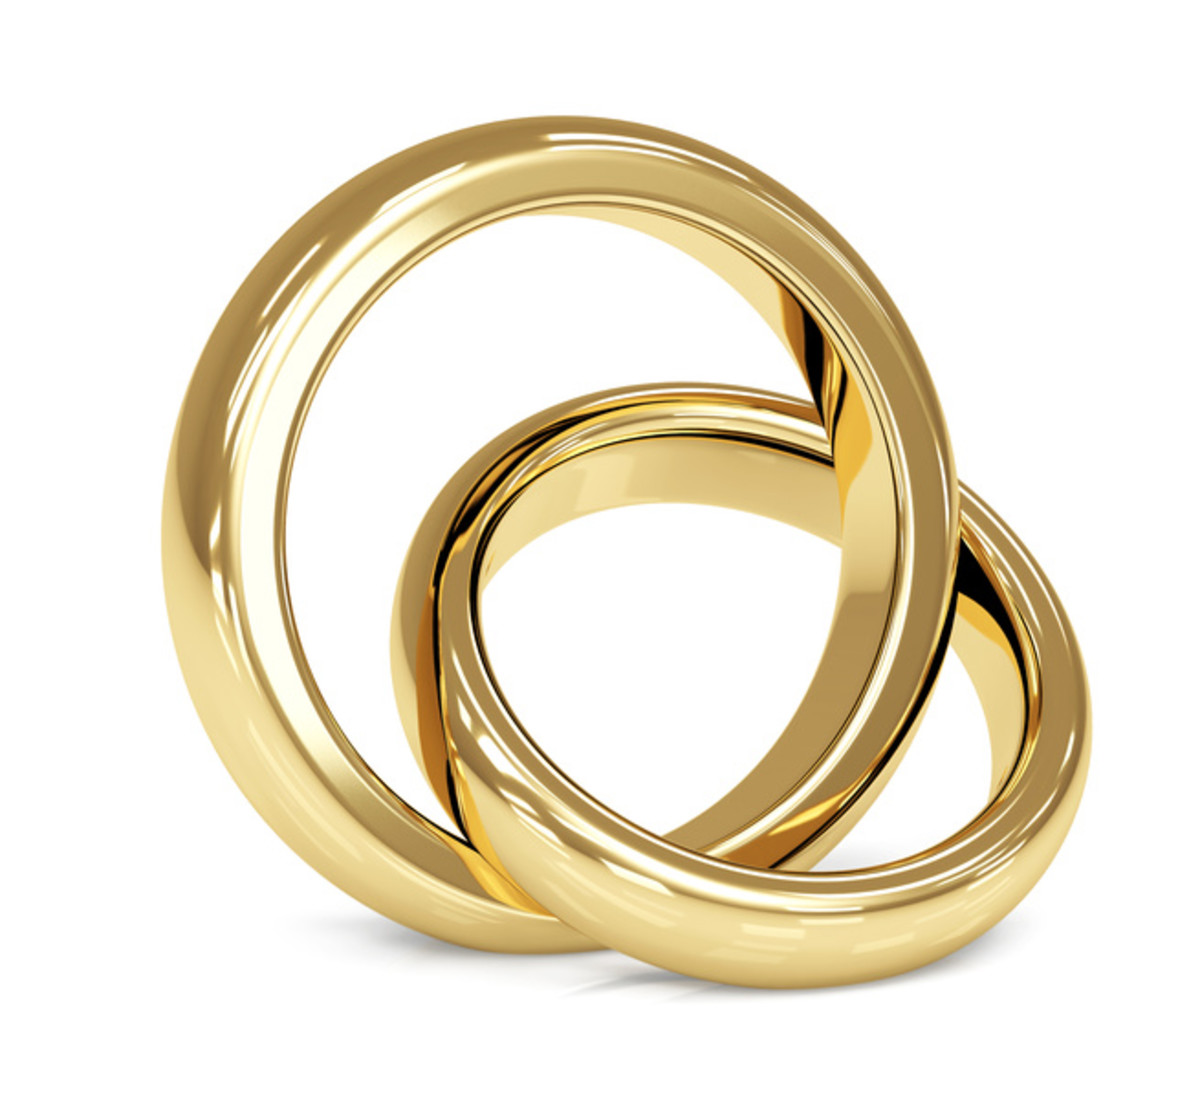 A set of simple modern day wedding rings